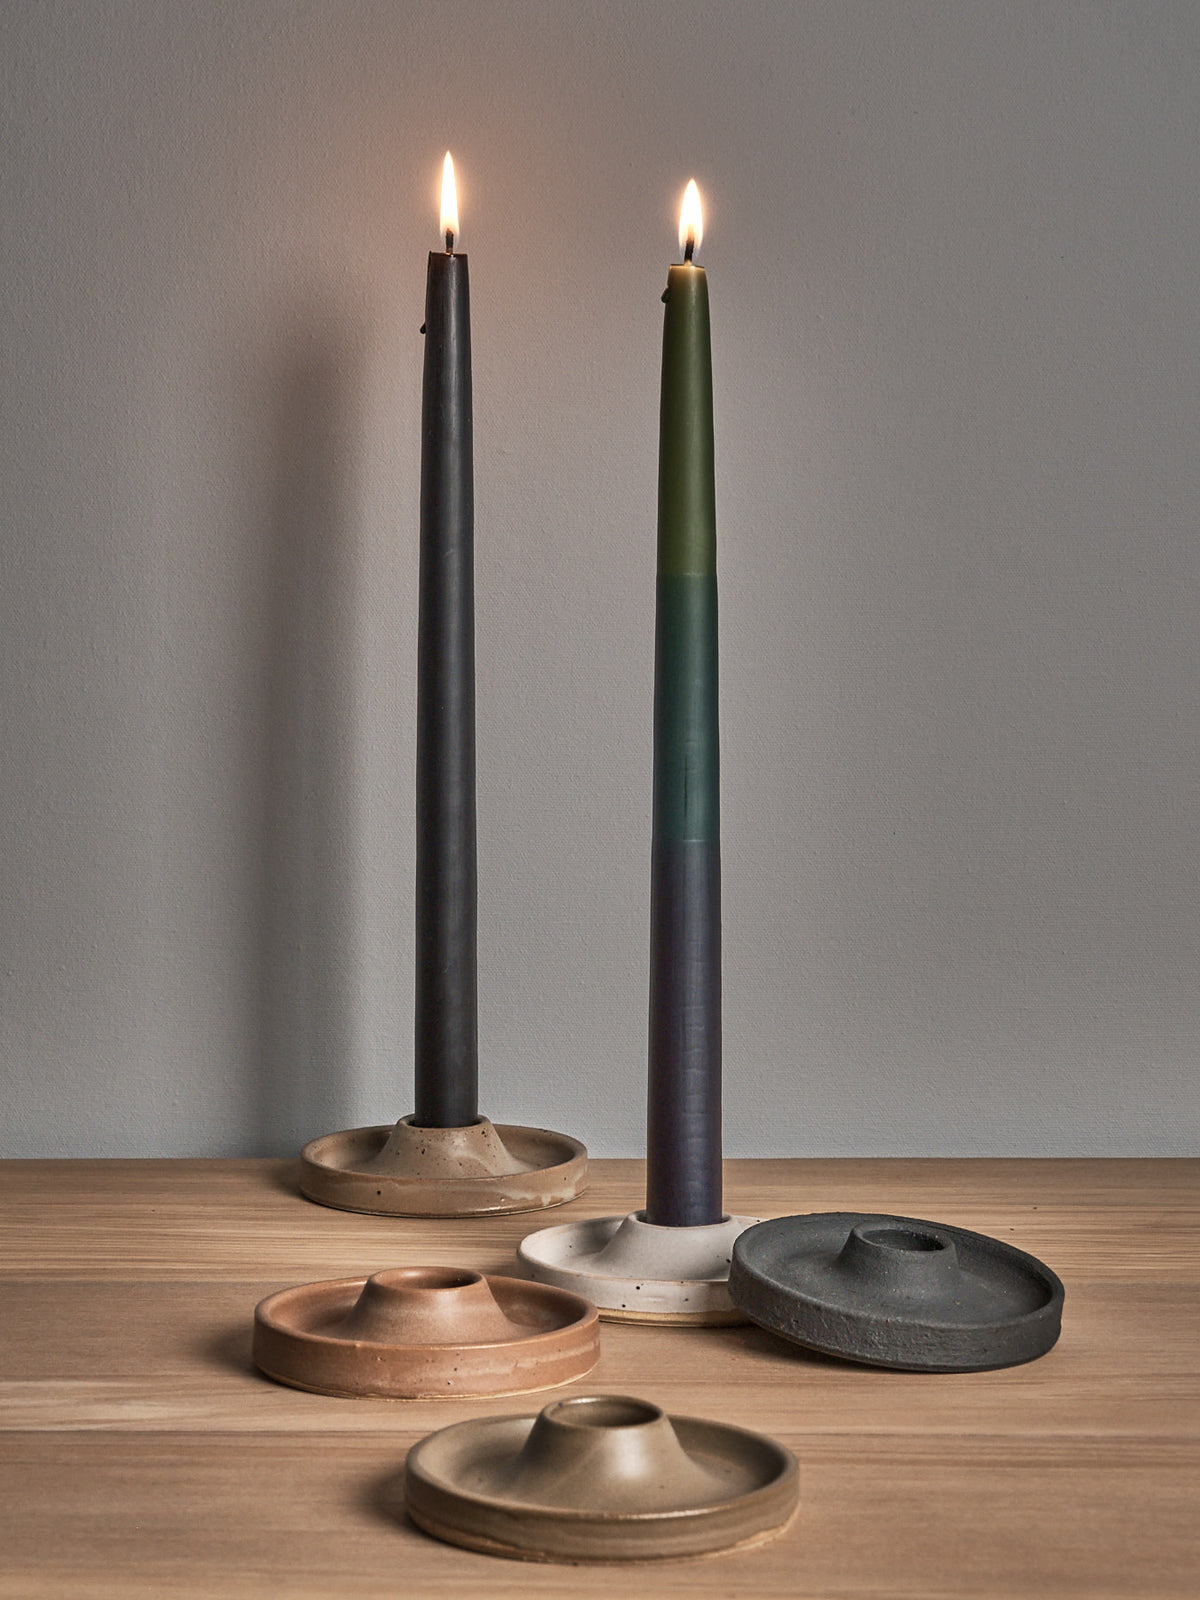 Three Deborah Sweeney Candle Holder – Walnut candles on a wooden table next to each other.